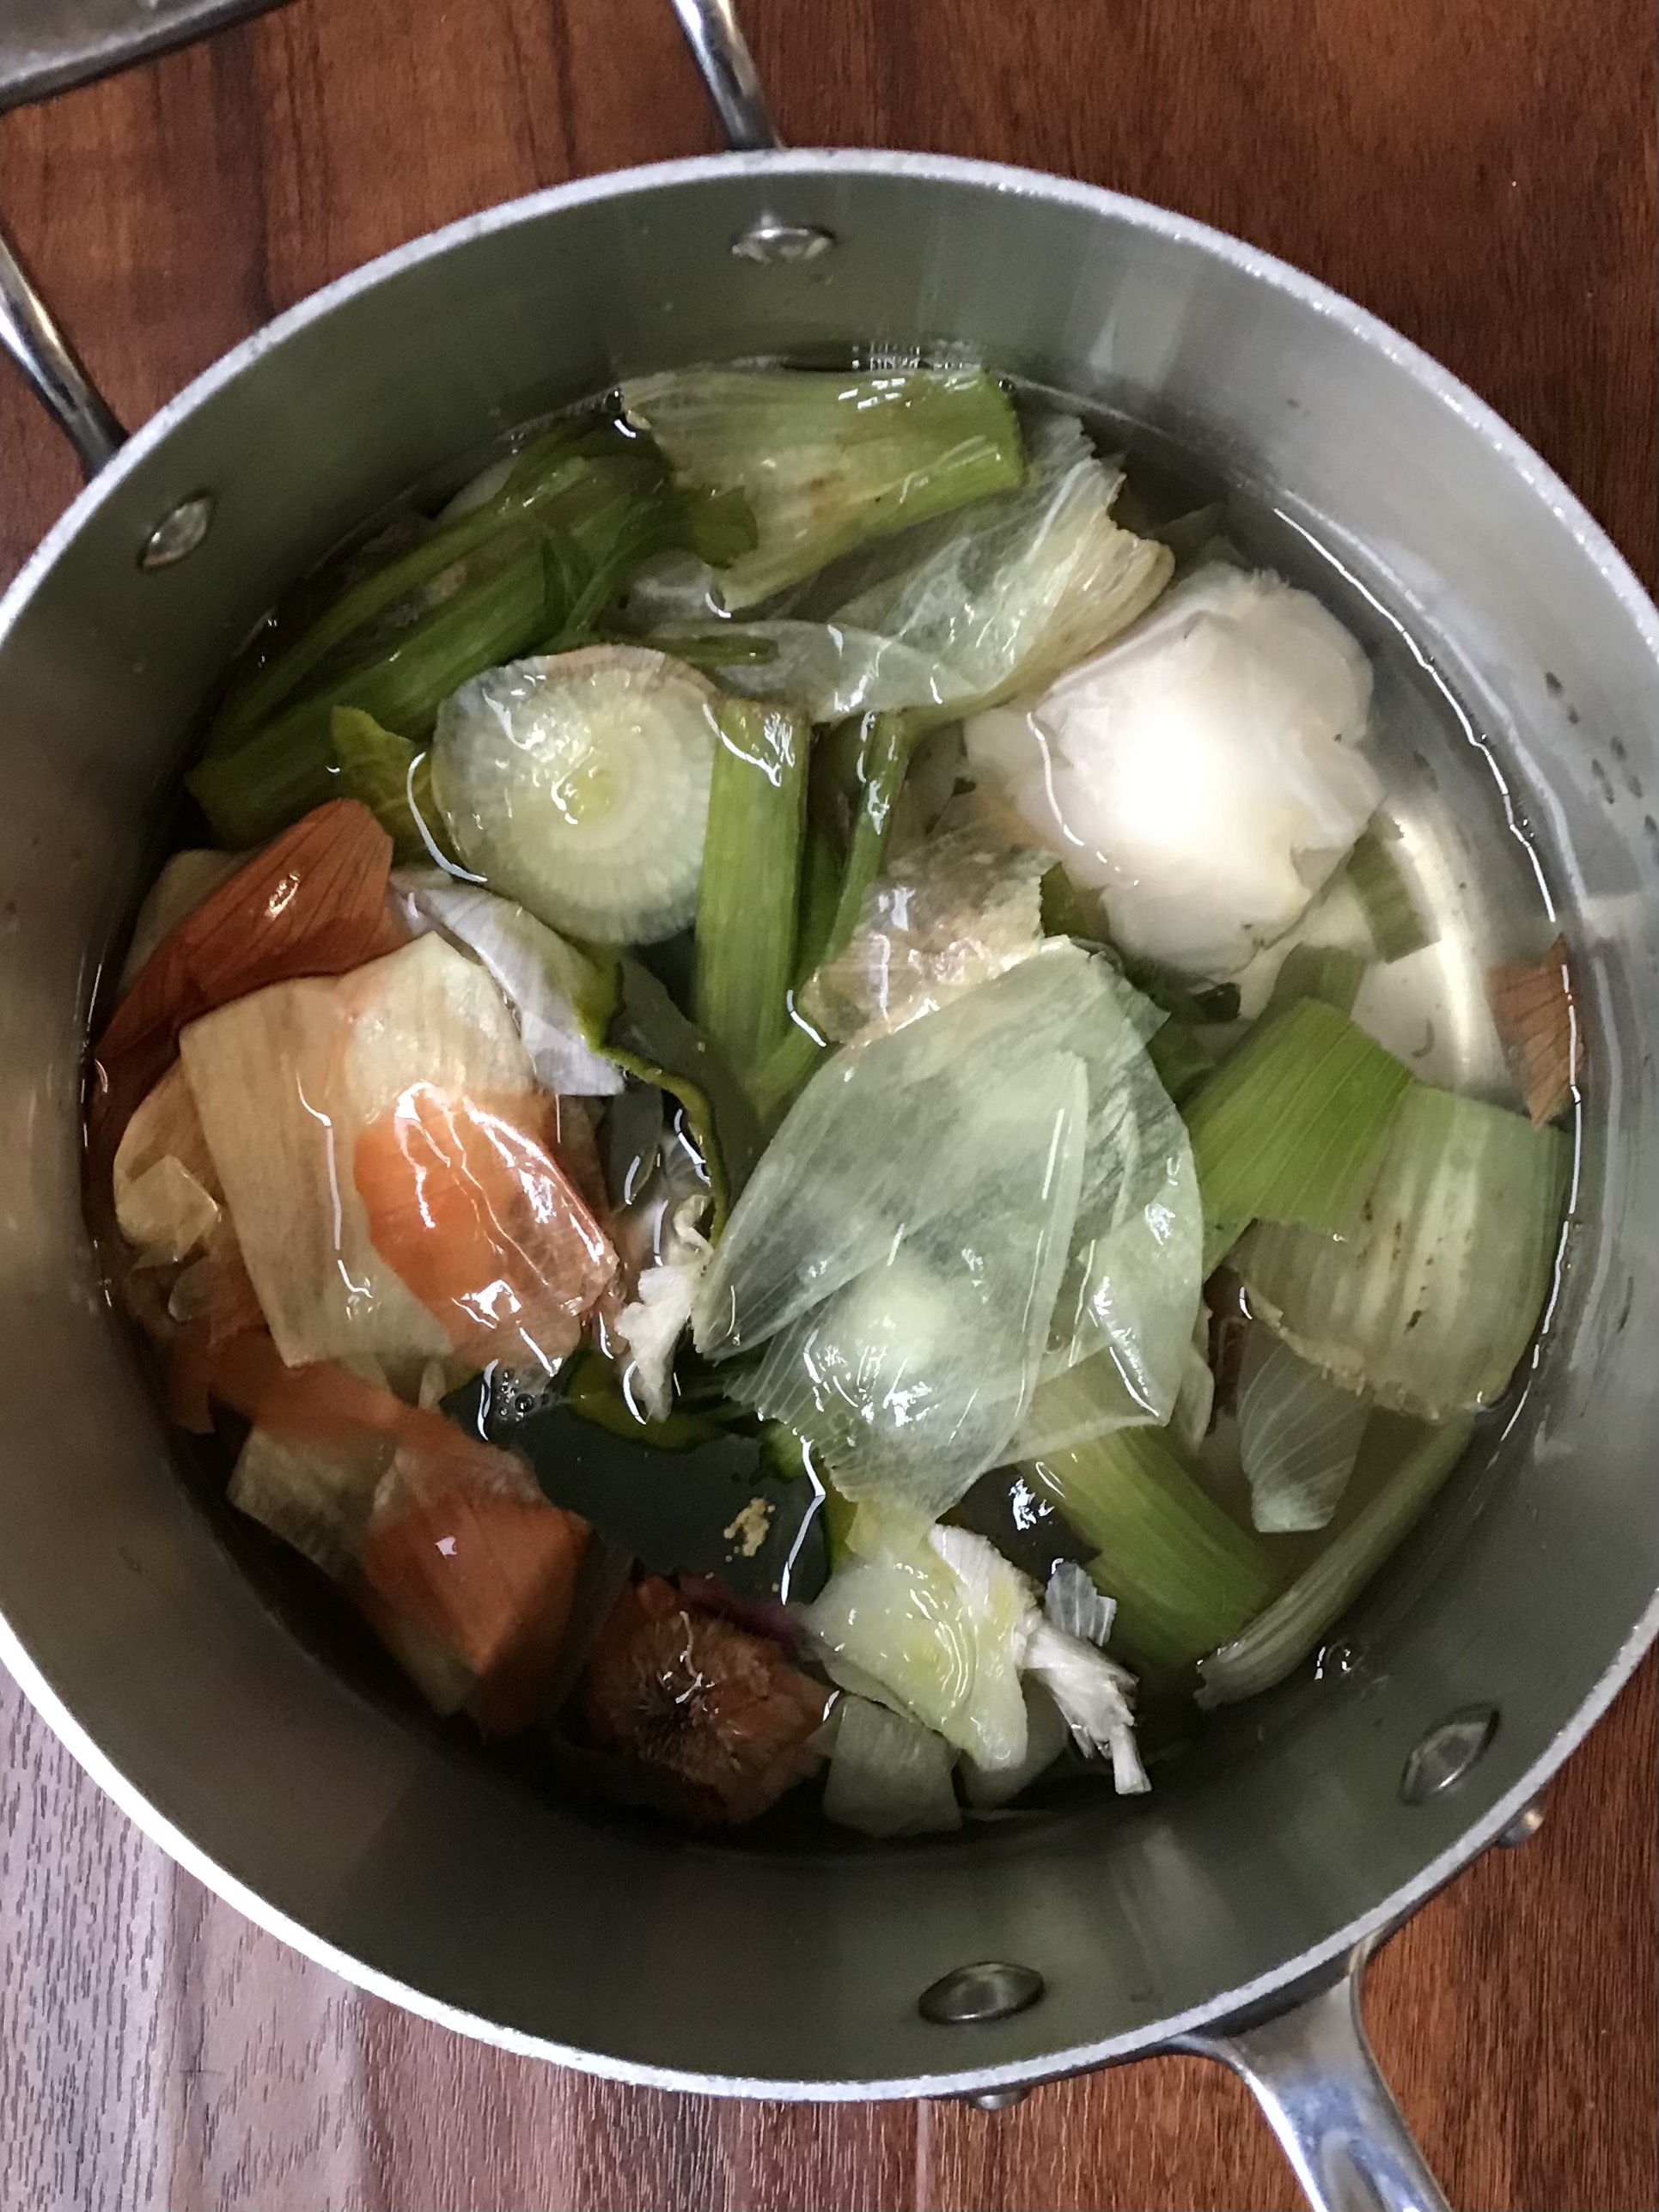 How to Use Leftover Food Scraps to Make Stock or Broth